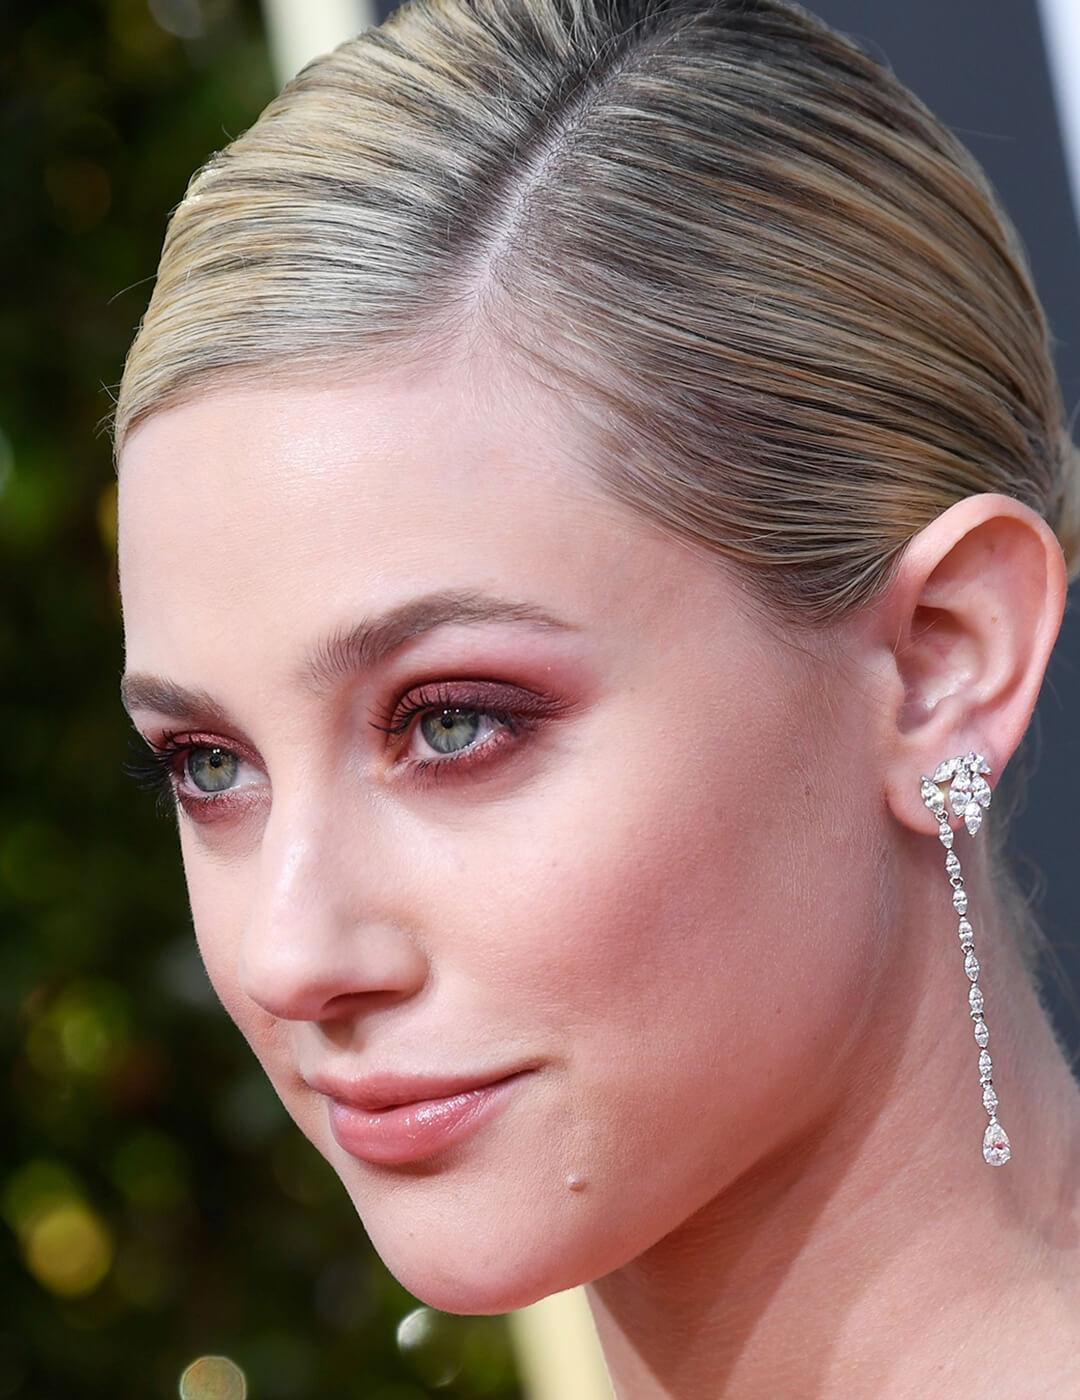 An image of Lili Reinhart showing her red semi-smokey eyeshadow accentuated with her long silver earrings